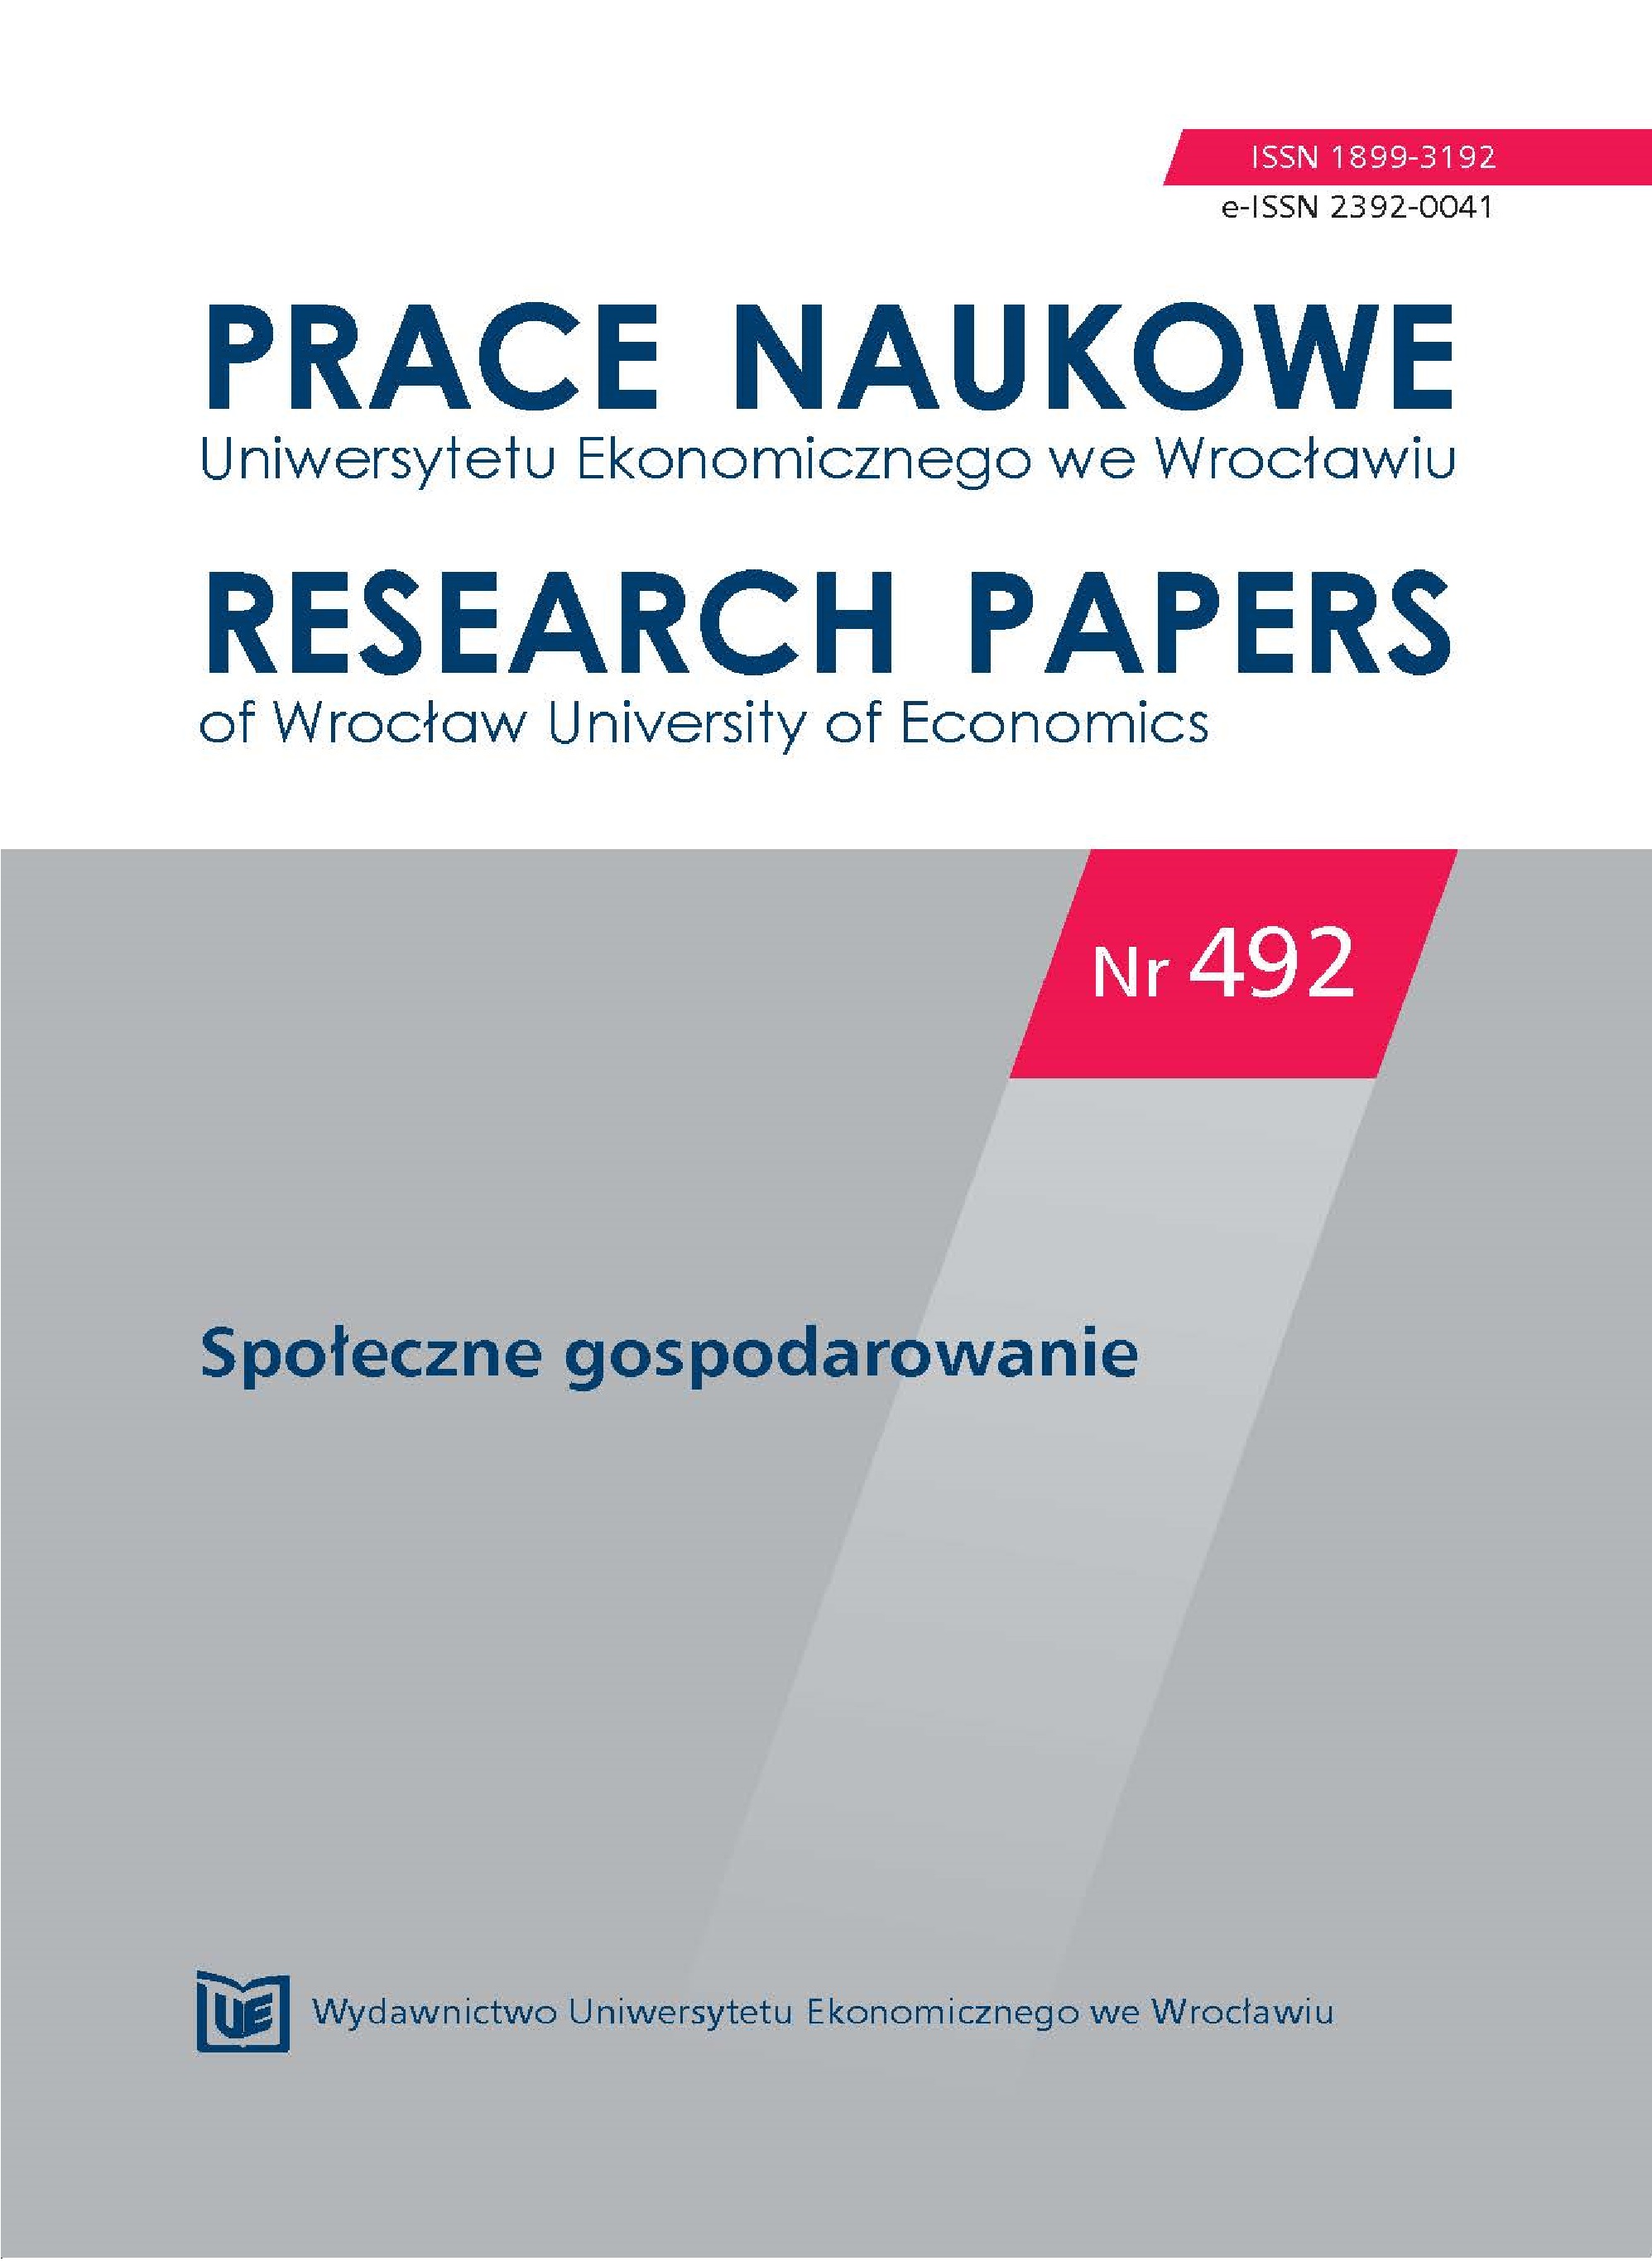 Cross-sectoral
cooperation of social economy entities in the Western Pomeranian
Voivodeship Cover Image